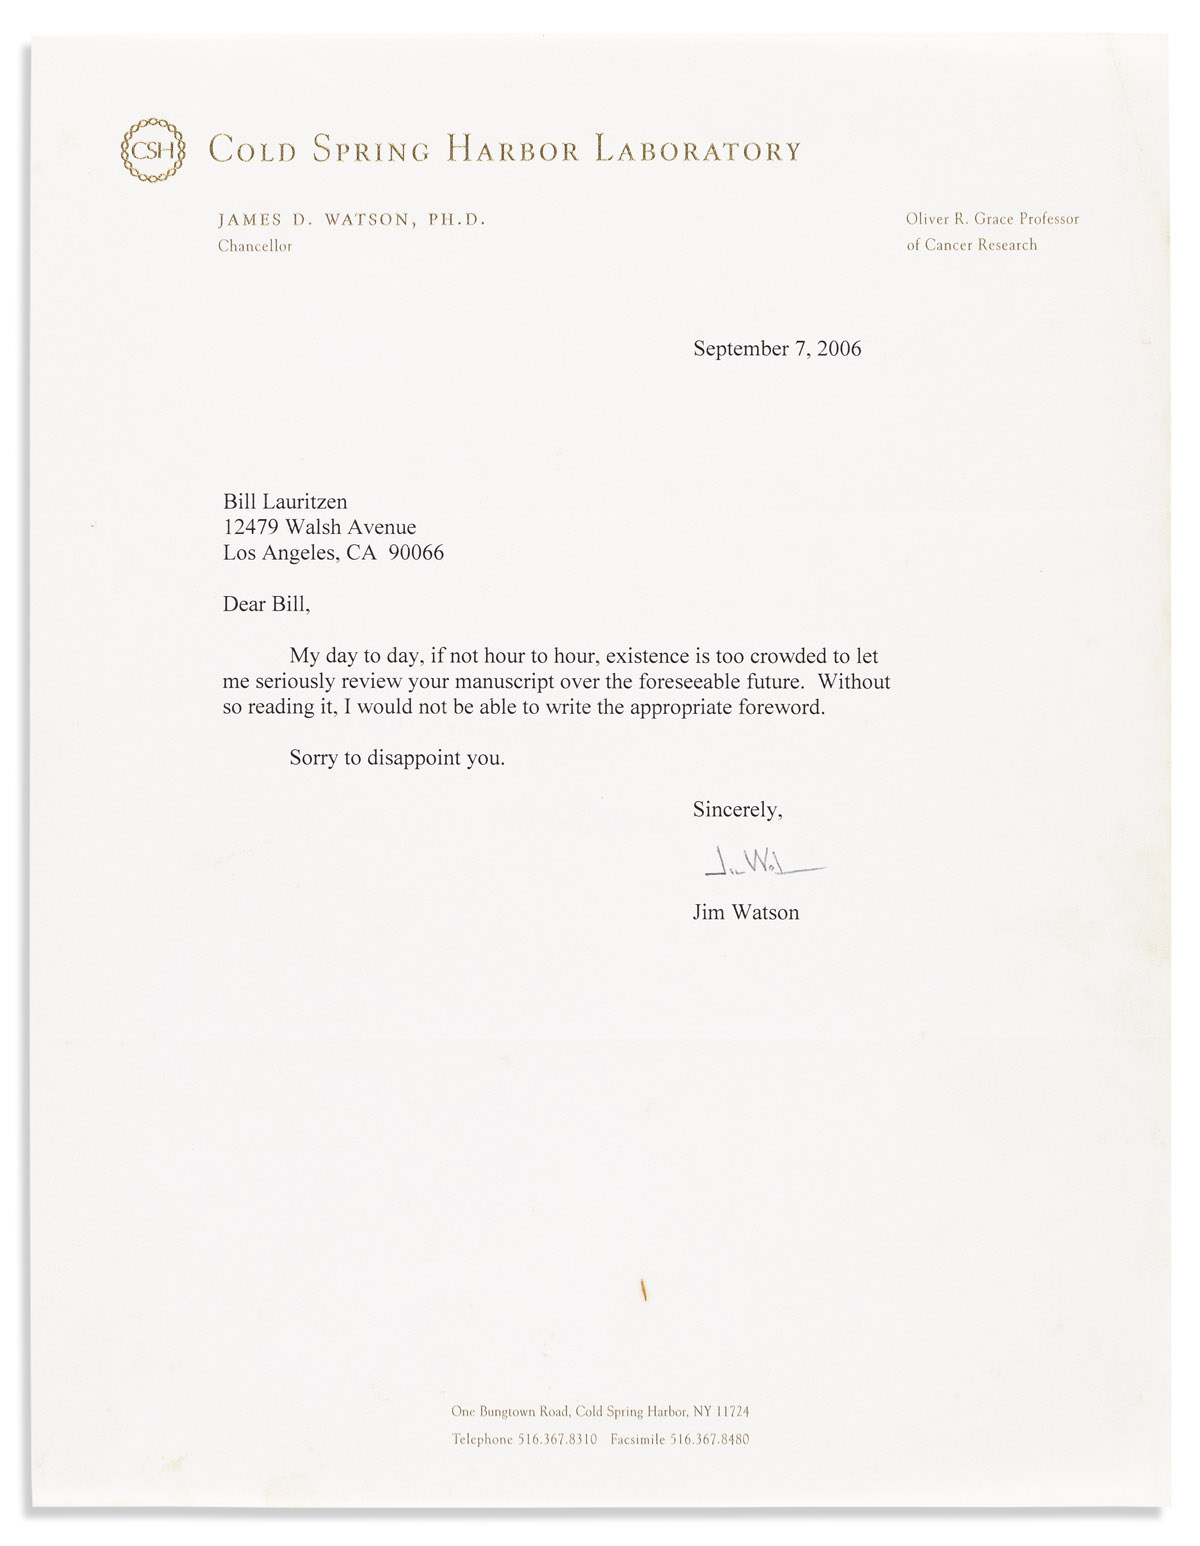 (SCIENTISTS.) WATSON, JAMES DEWEY. Typed Letter Signed, Jim Watson, to William Lauritzen, declining to write a foreword.